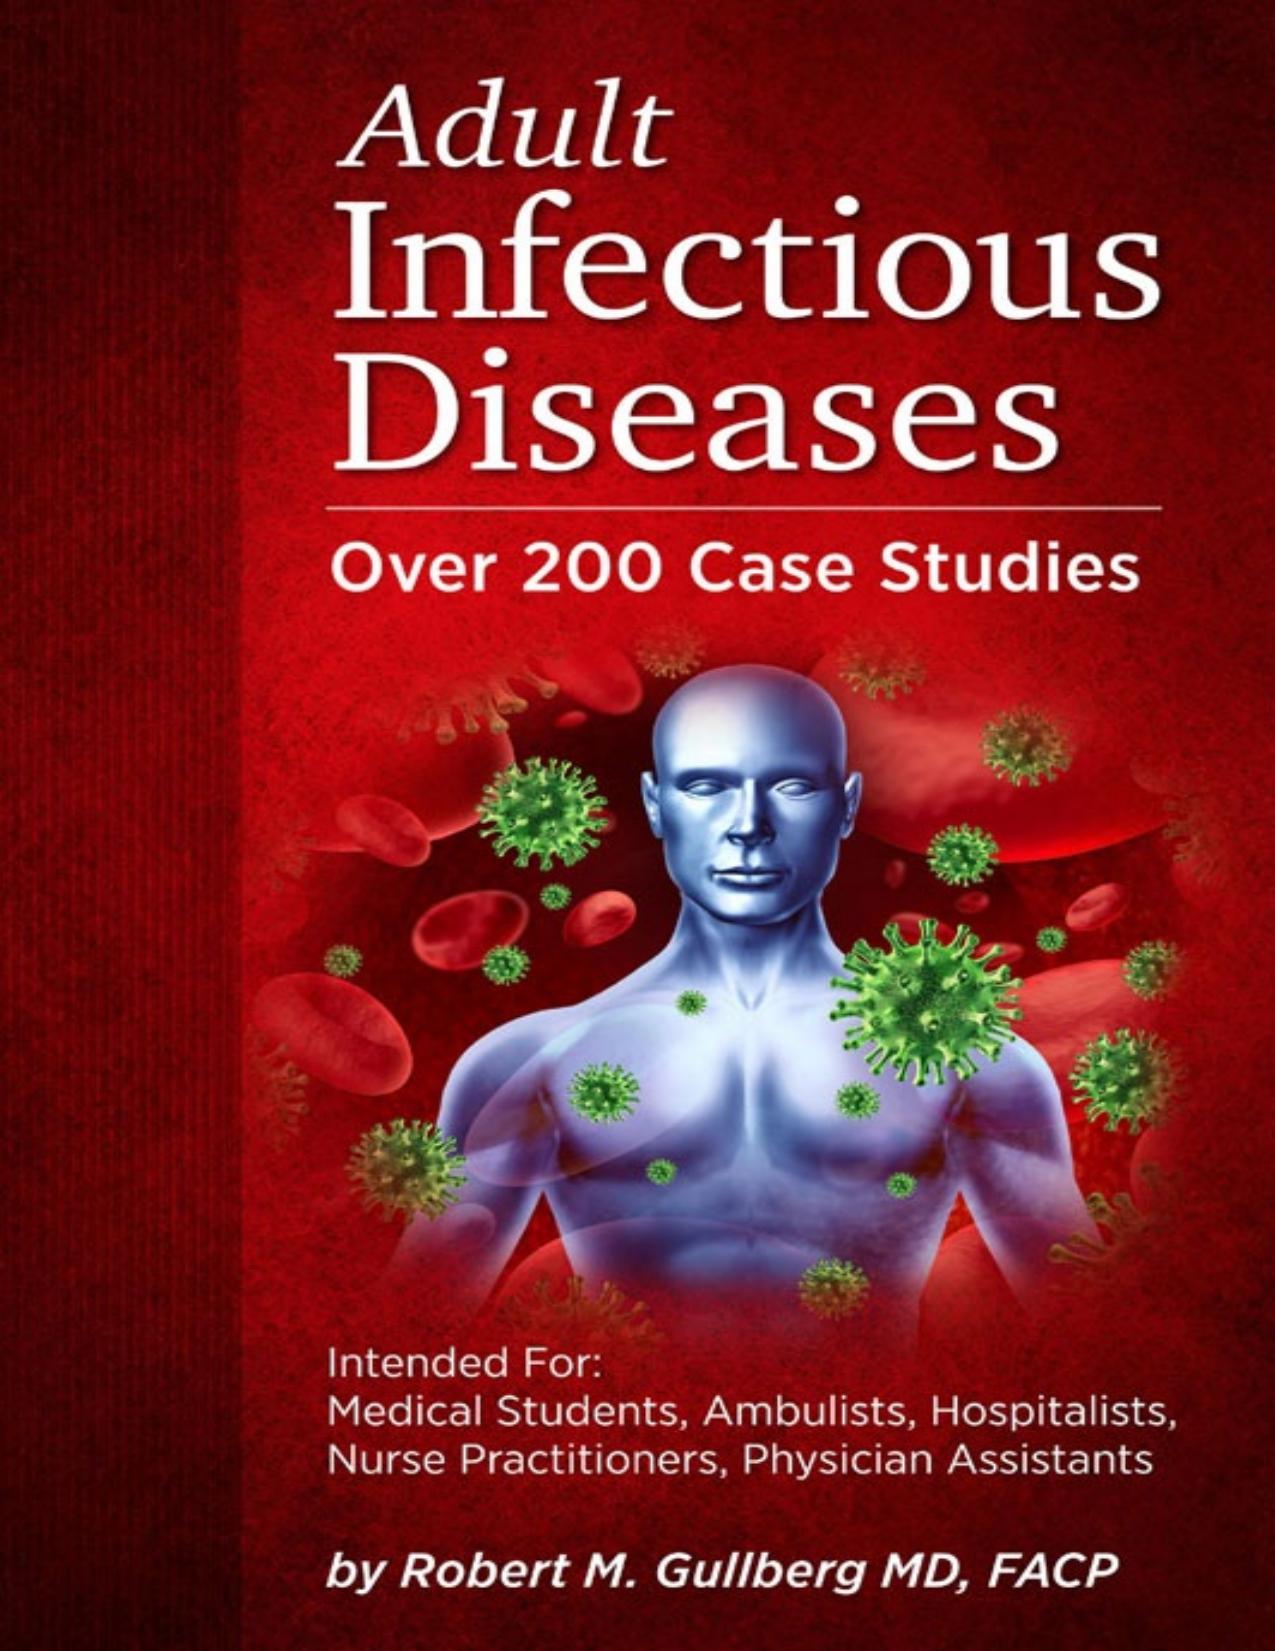 Adult Infectious Diseases Over 200 Case Studies: Intended For: Medical Students, Ambulists, Hospitalists, Nurse Practitioners, Physician Assistants